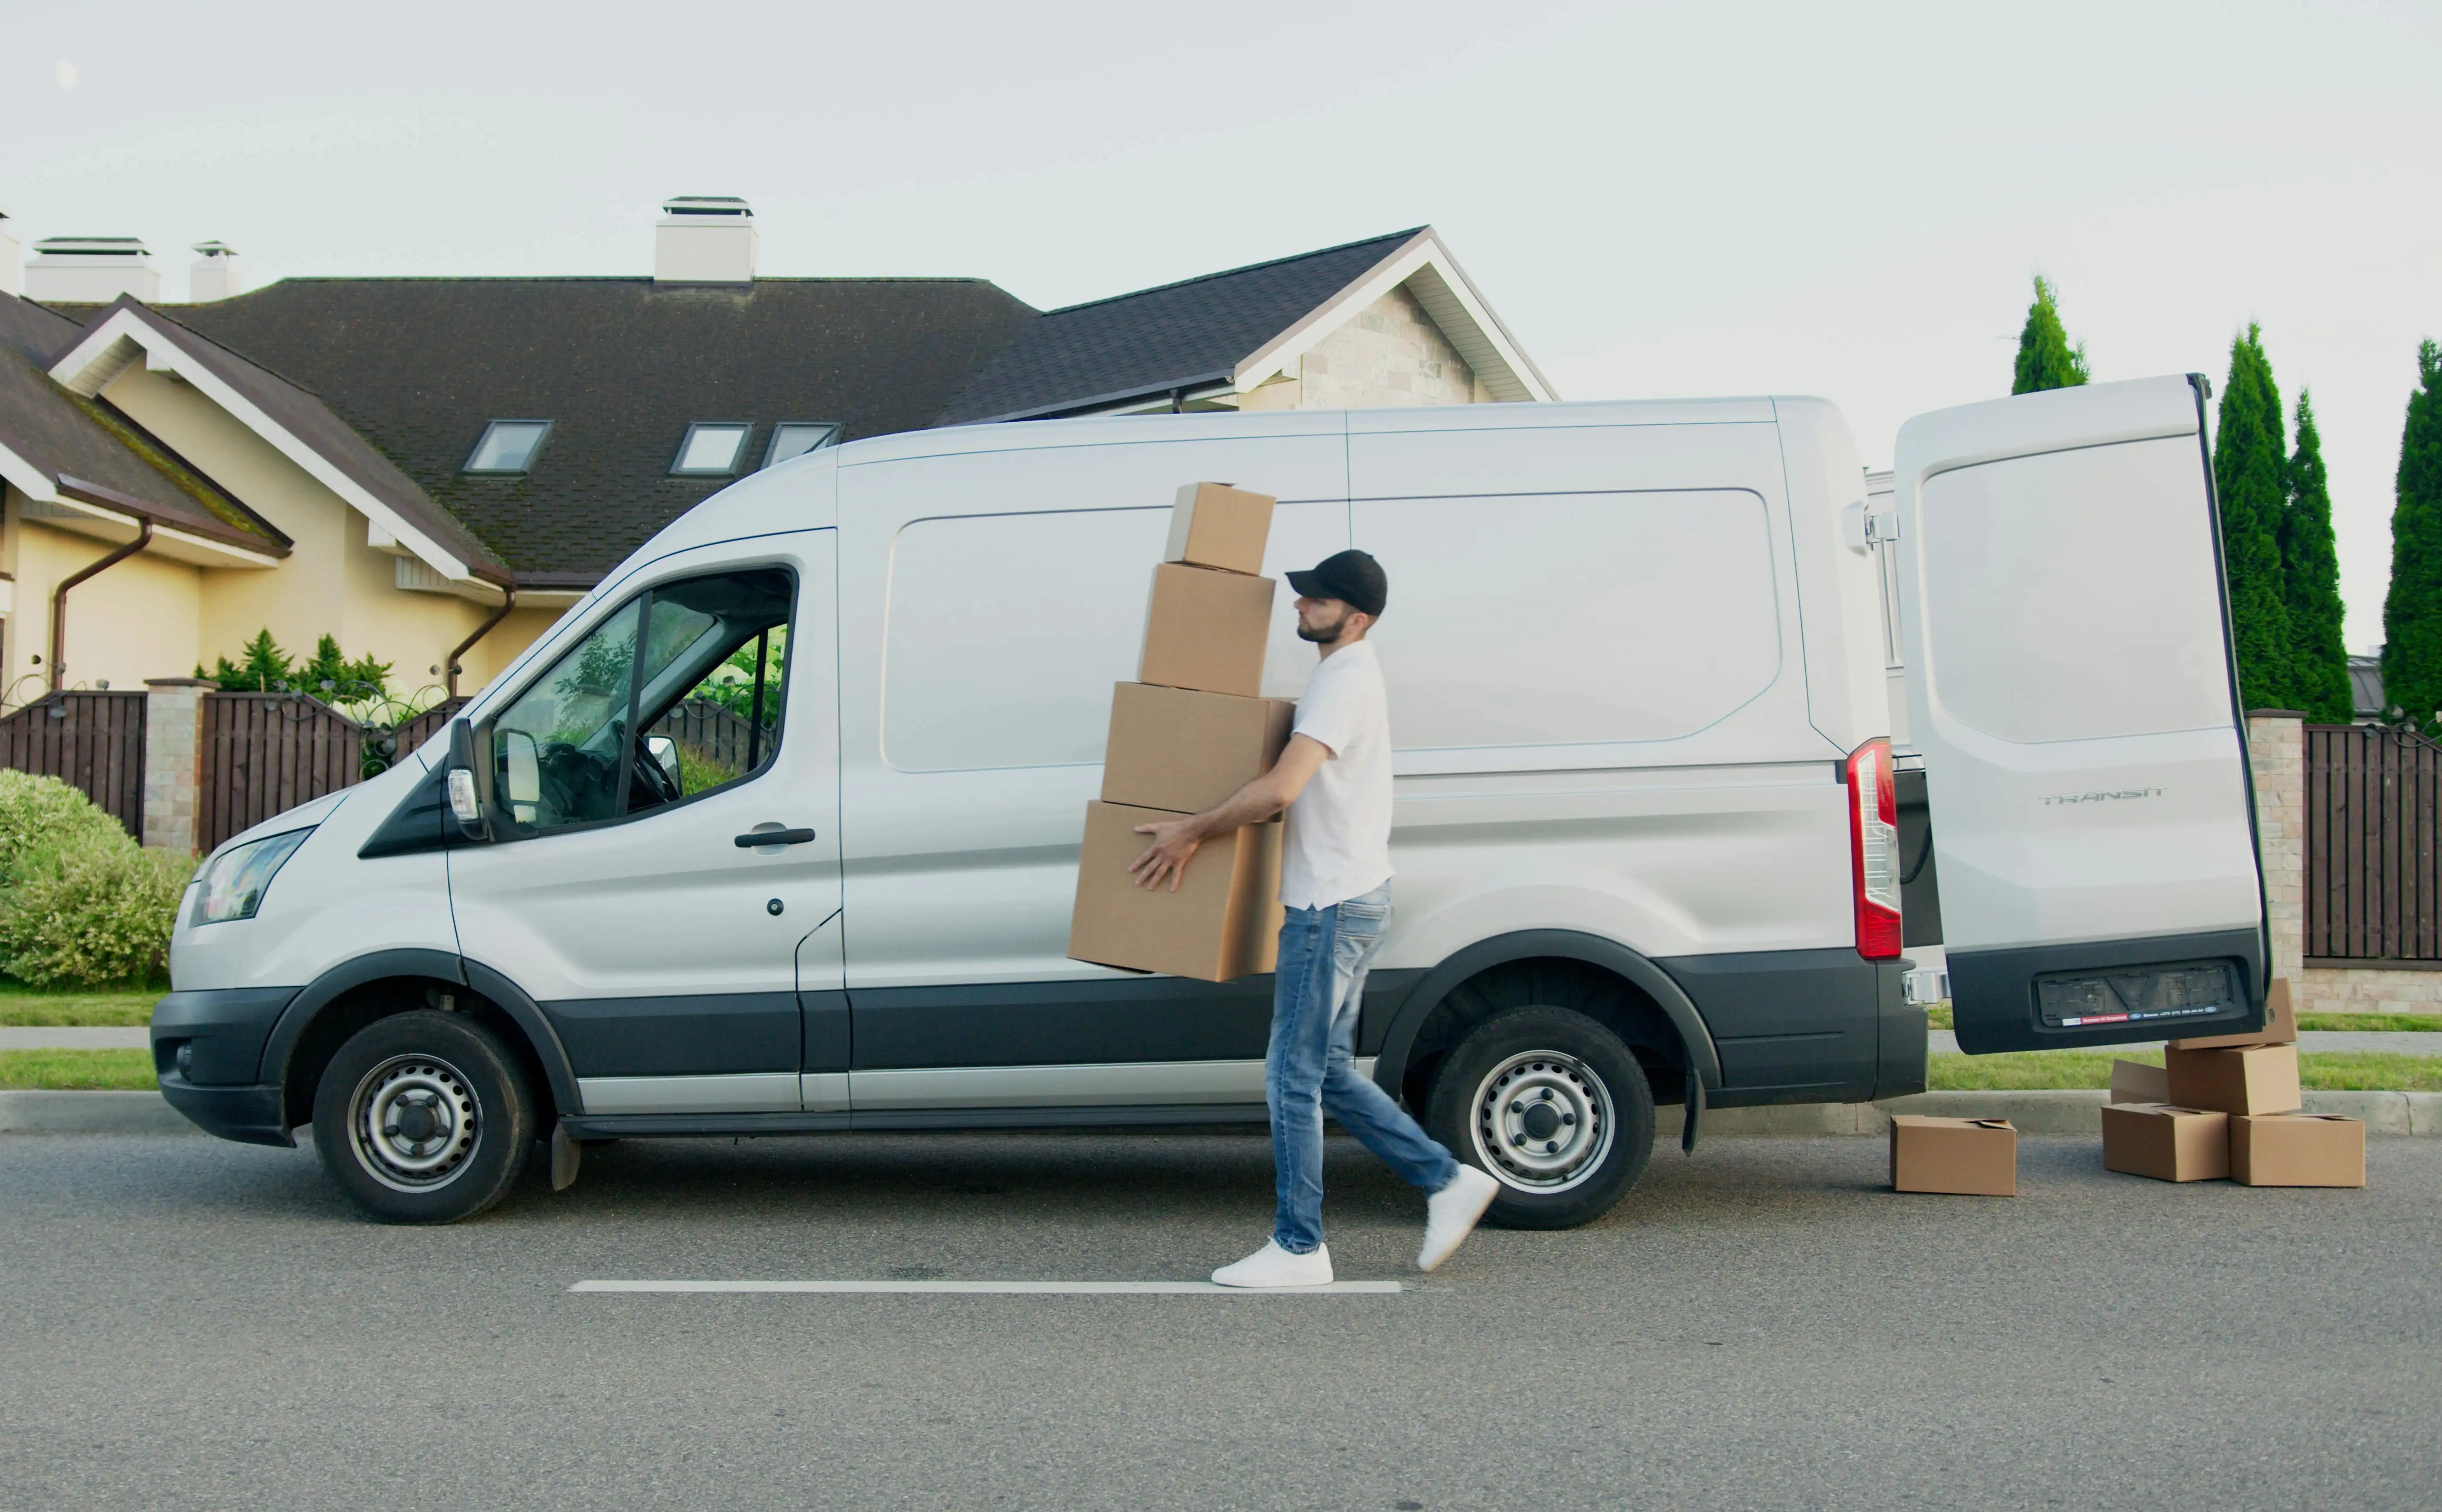 A man removes boxes from a hire van